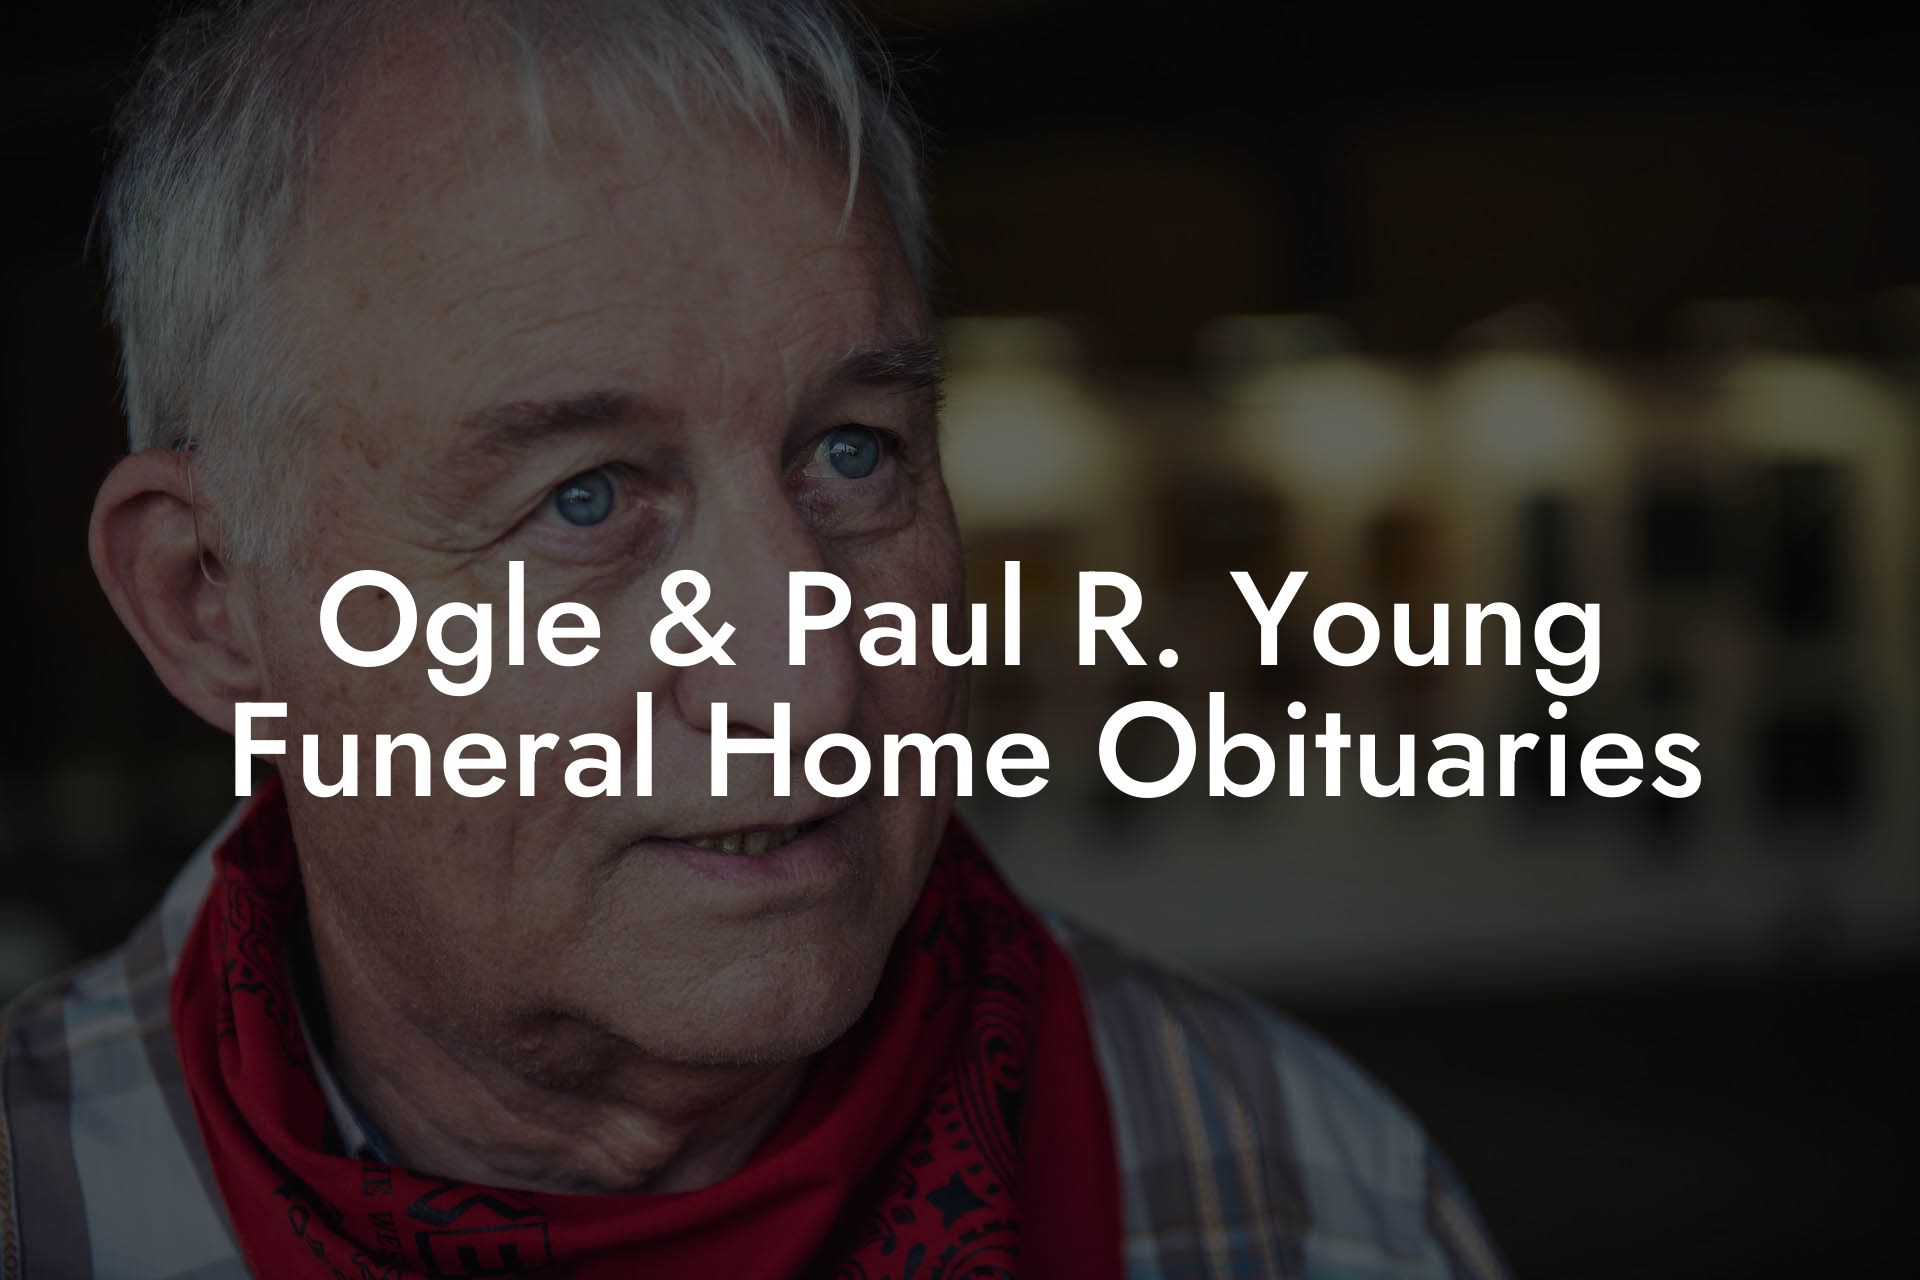 Ogle & Paul R. Young Funeral Home Obituaries